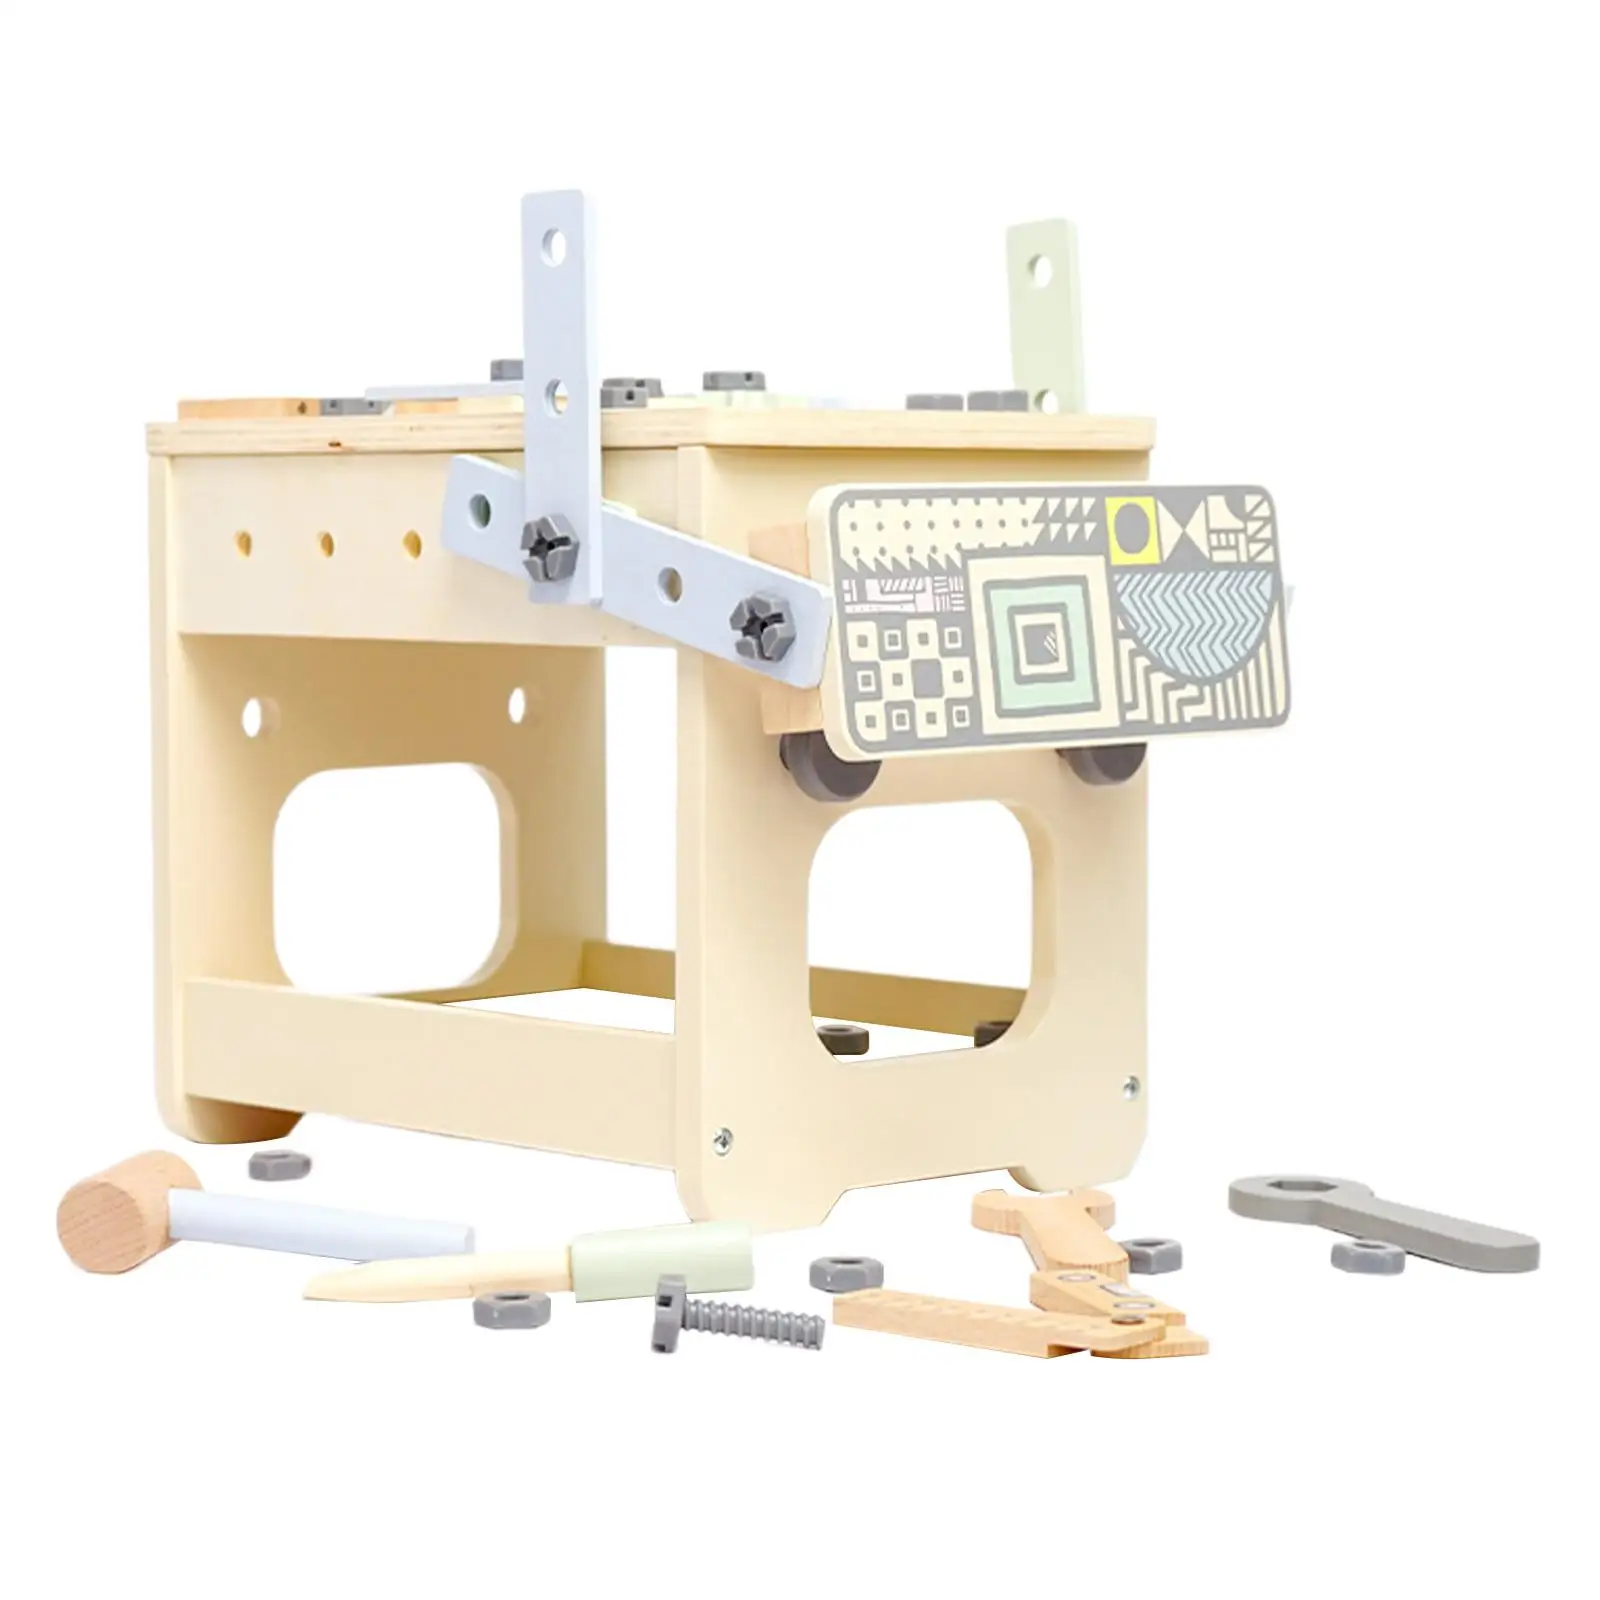 Tool bench Set Wooden Toy Developmental Multifunctional DIY Creative DIY Construction Toy for Education Learning Activities